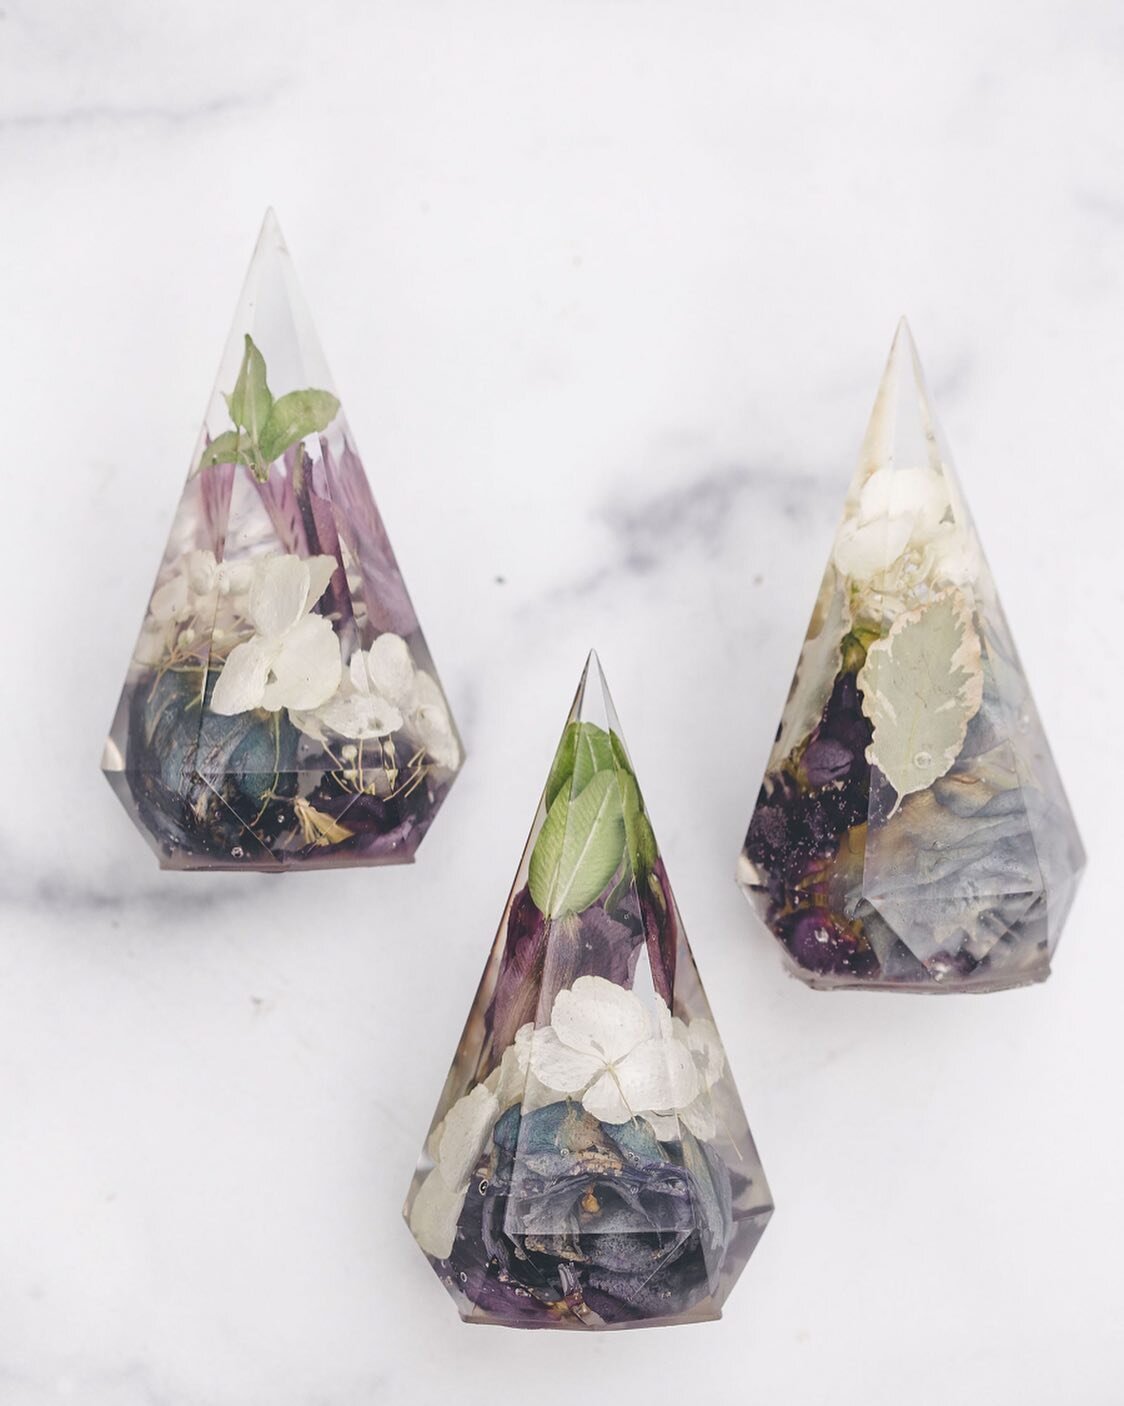 Your wedding day may pass in a blur, but your bouquet can be preserved as a timeless reminder of your love.

 Images by @sarahbabcockstudio
.
.
. #flowerpreservation #memorialflowers #bouquetpreservation #resin #resinartist